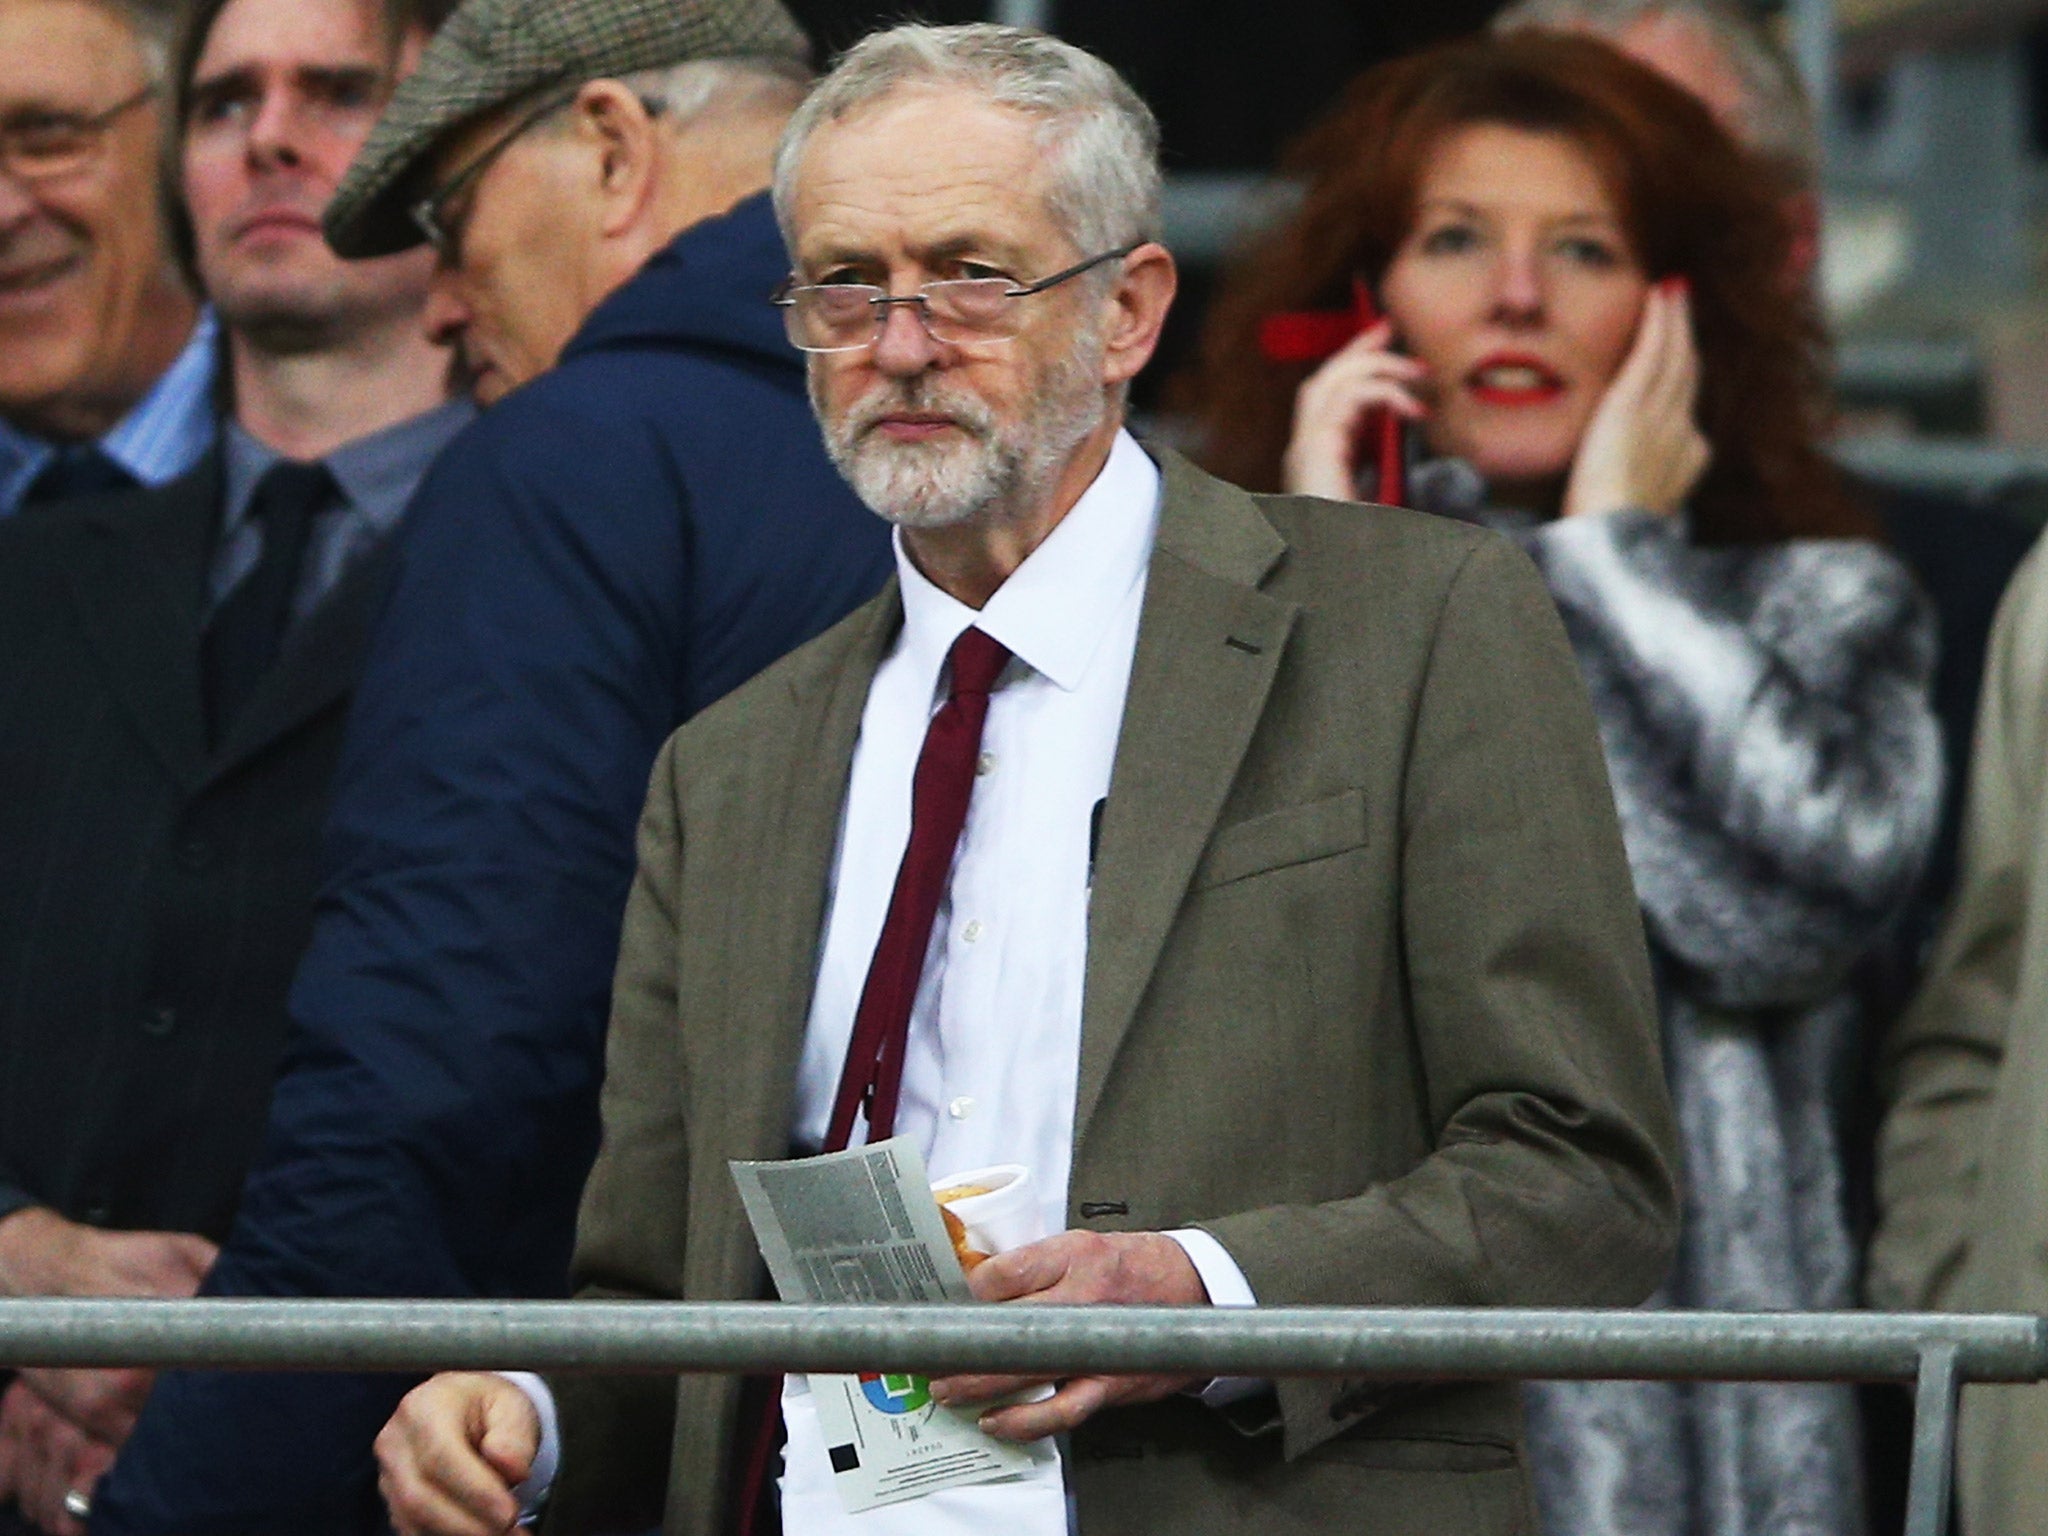 The Labour leader attended Tuesday night's football match between England and France at Wembley